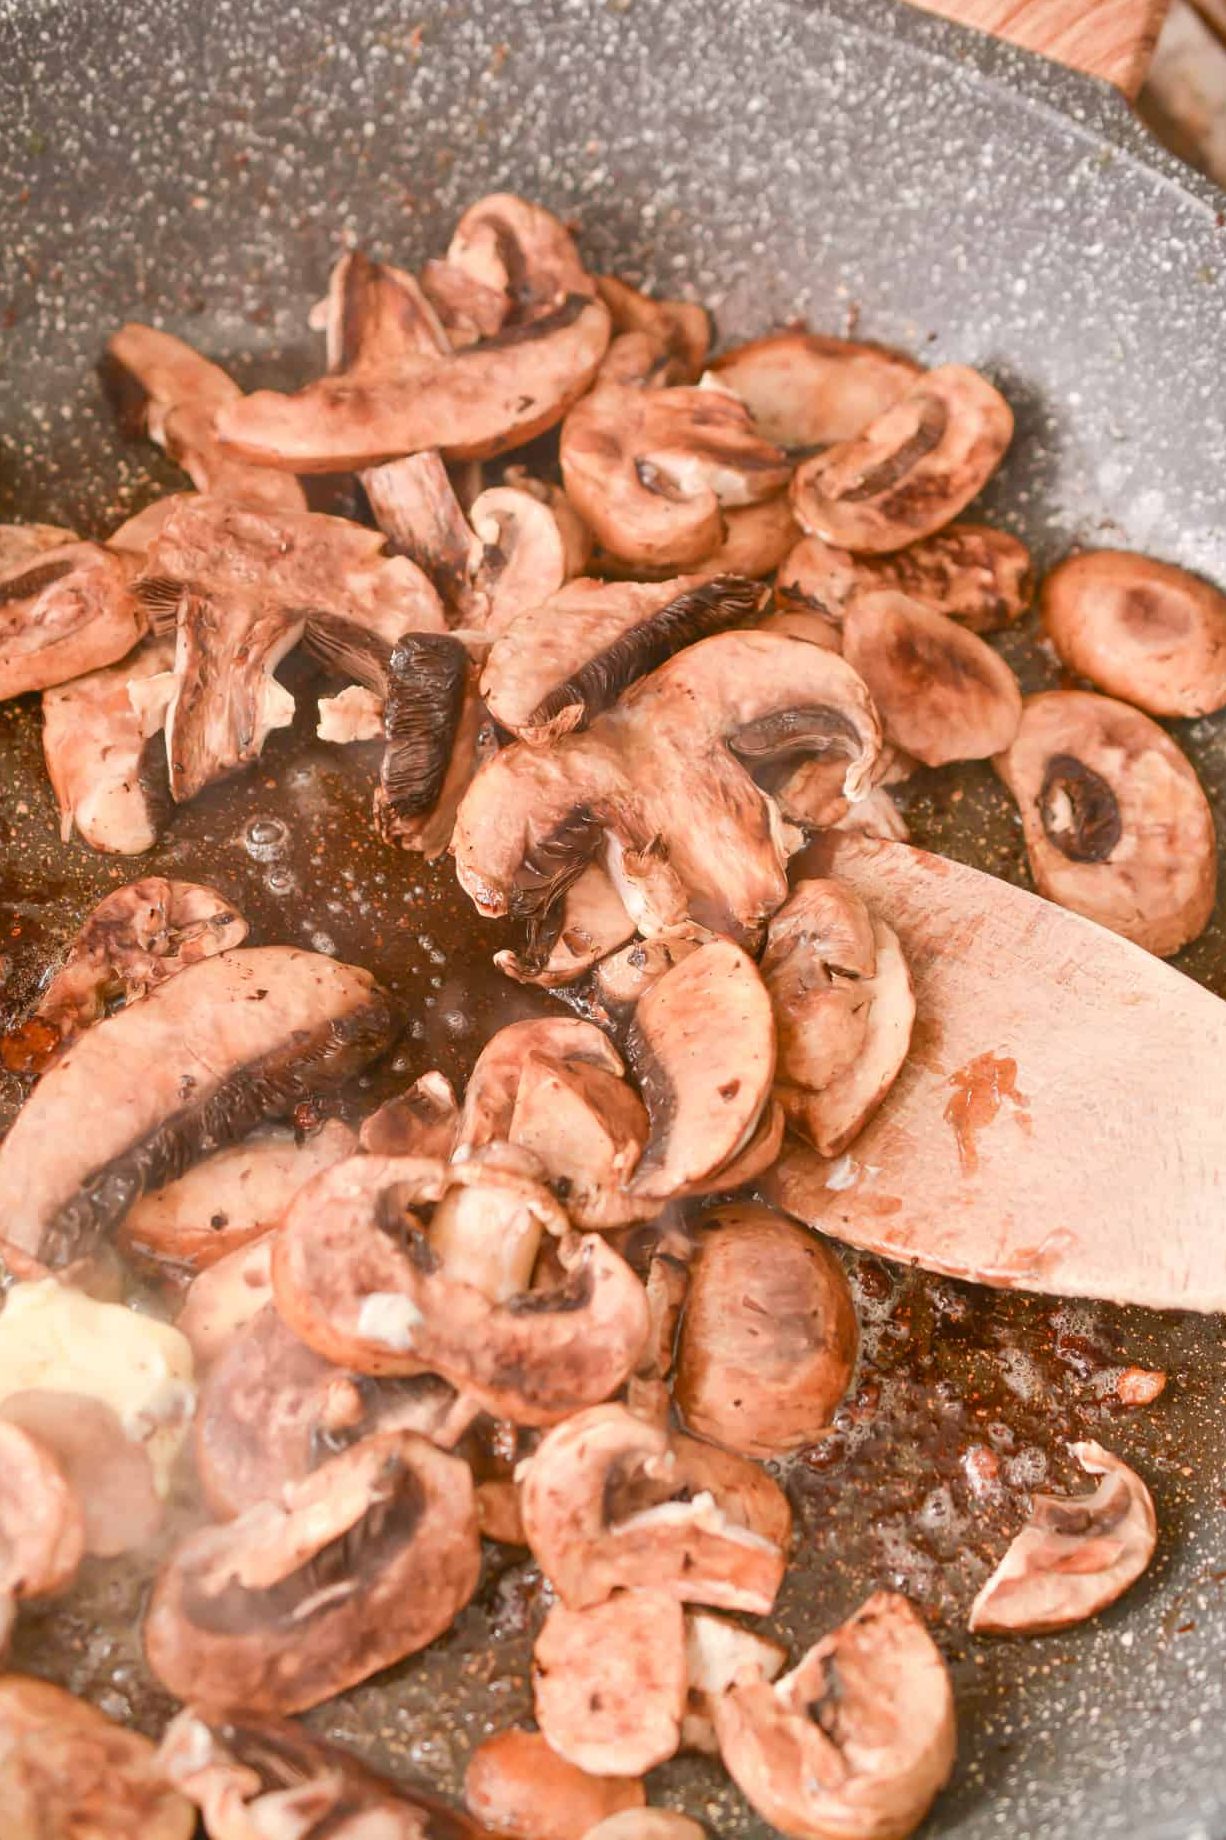 add 8 oz of sliced mushrooms, and saute until the mushrooms begin to soften.